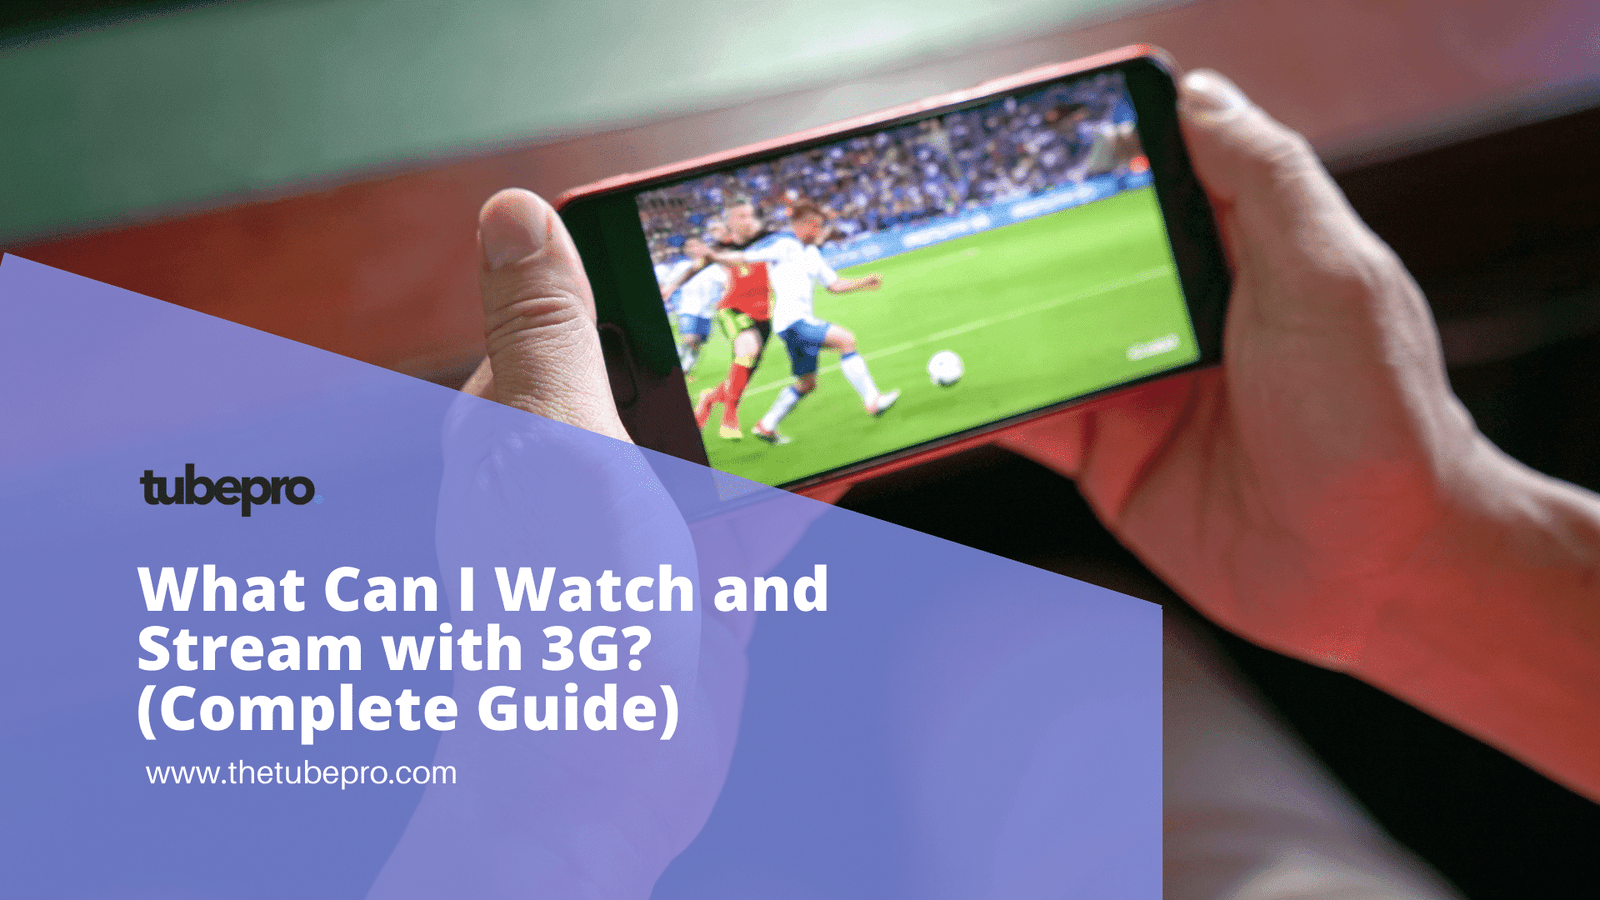 What Can I Watch and Stream with 3G? (Complete Guide)